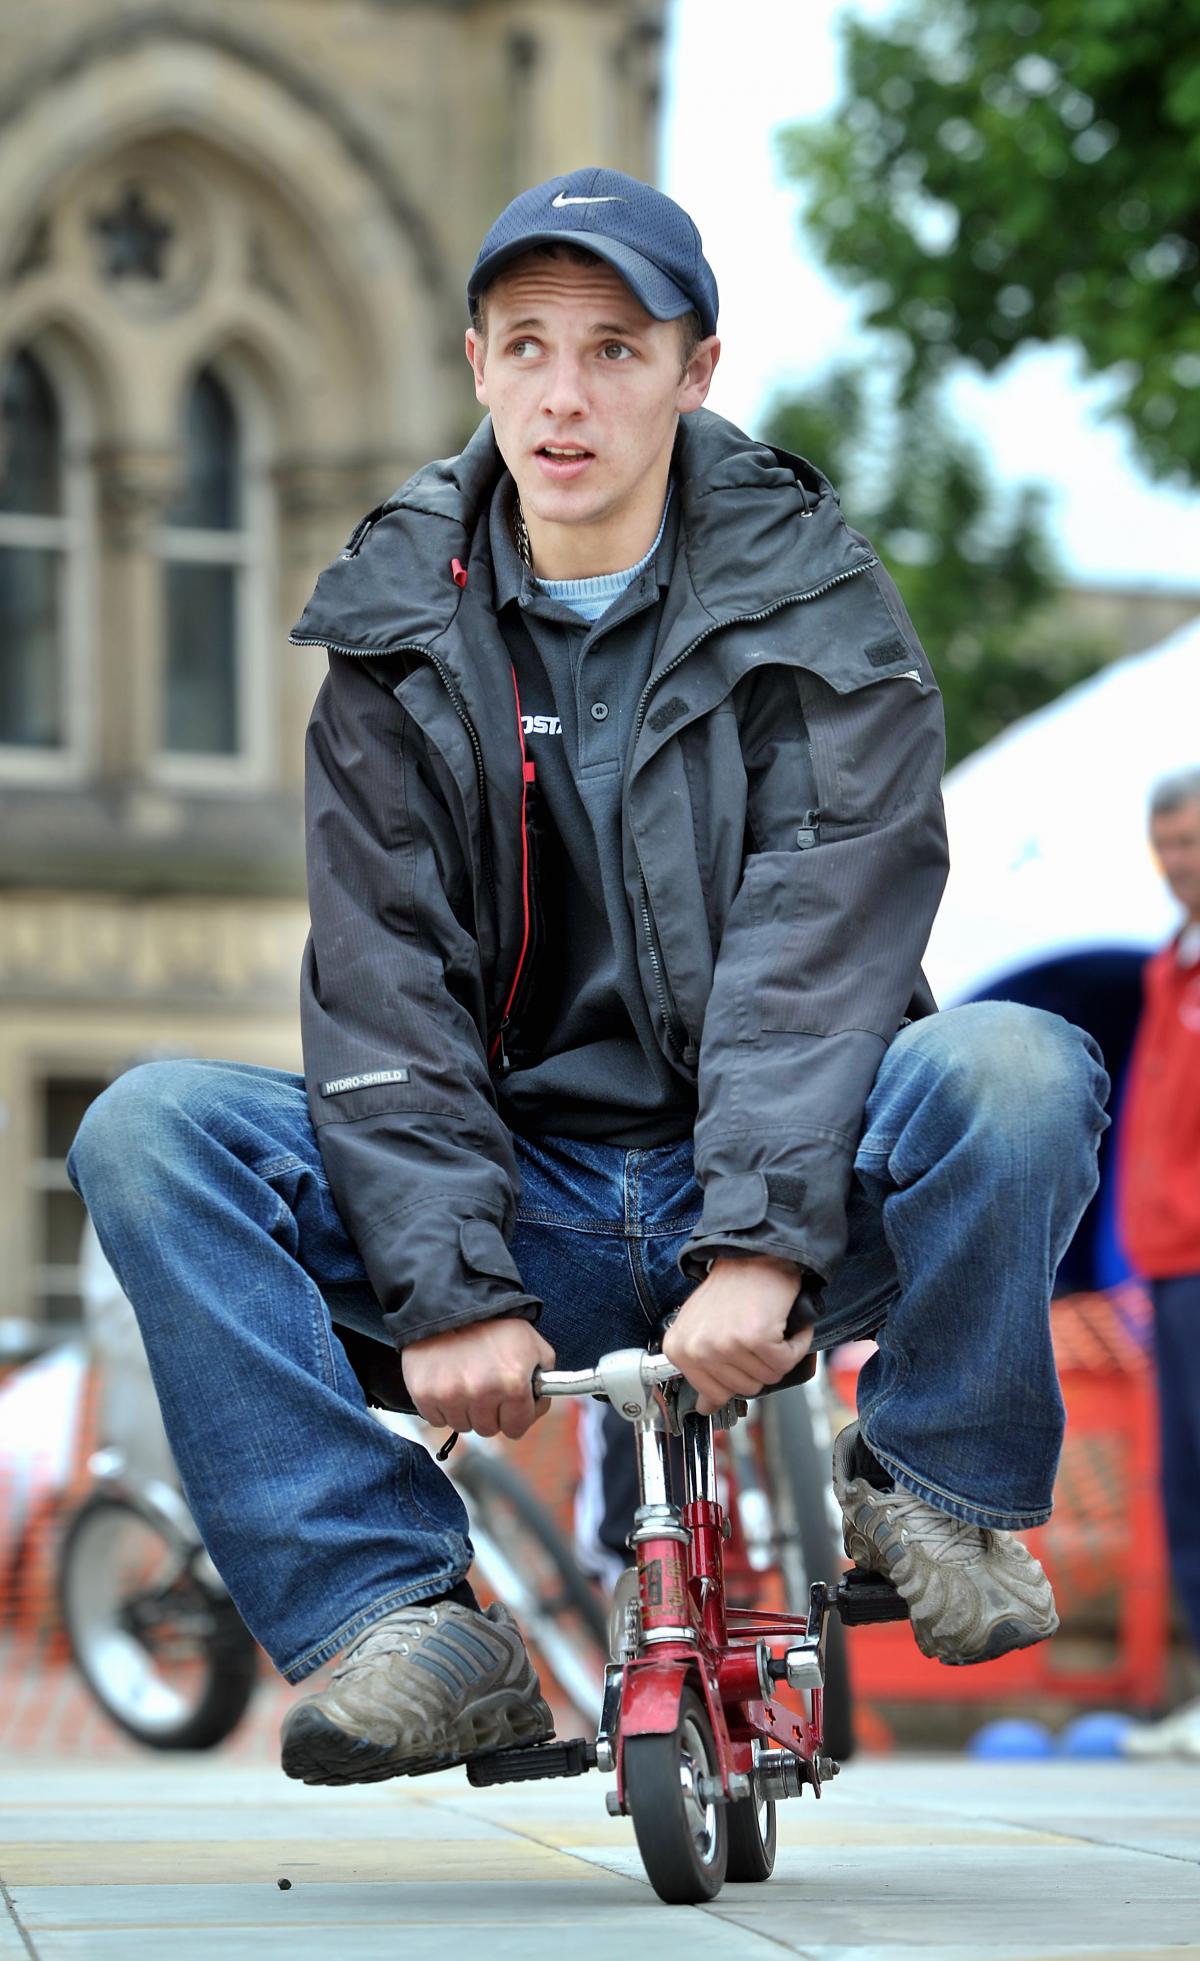 Darren Walker on a miniature bike at the Big City Play Day in Centenary Square, Bradford